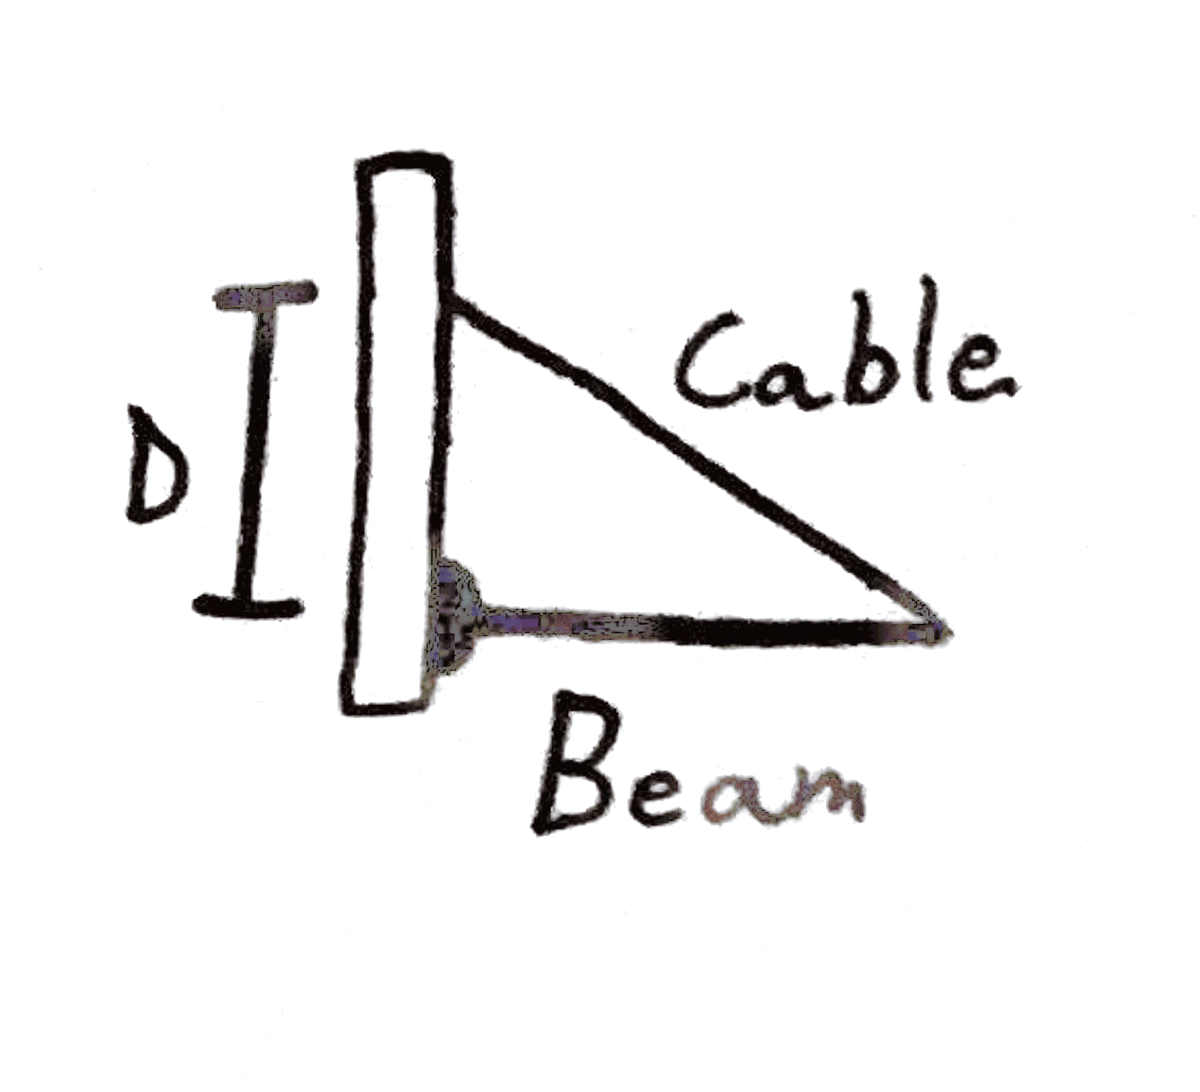 Cable
Beam
